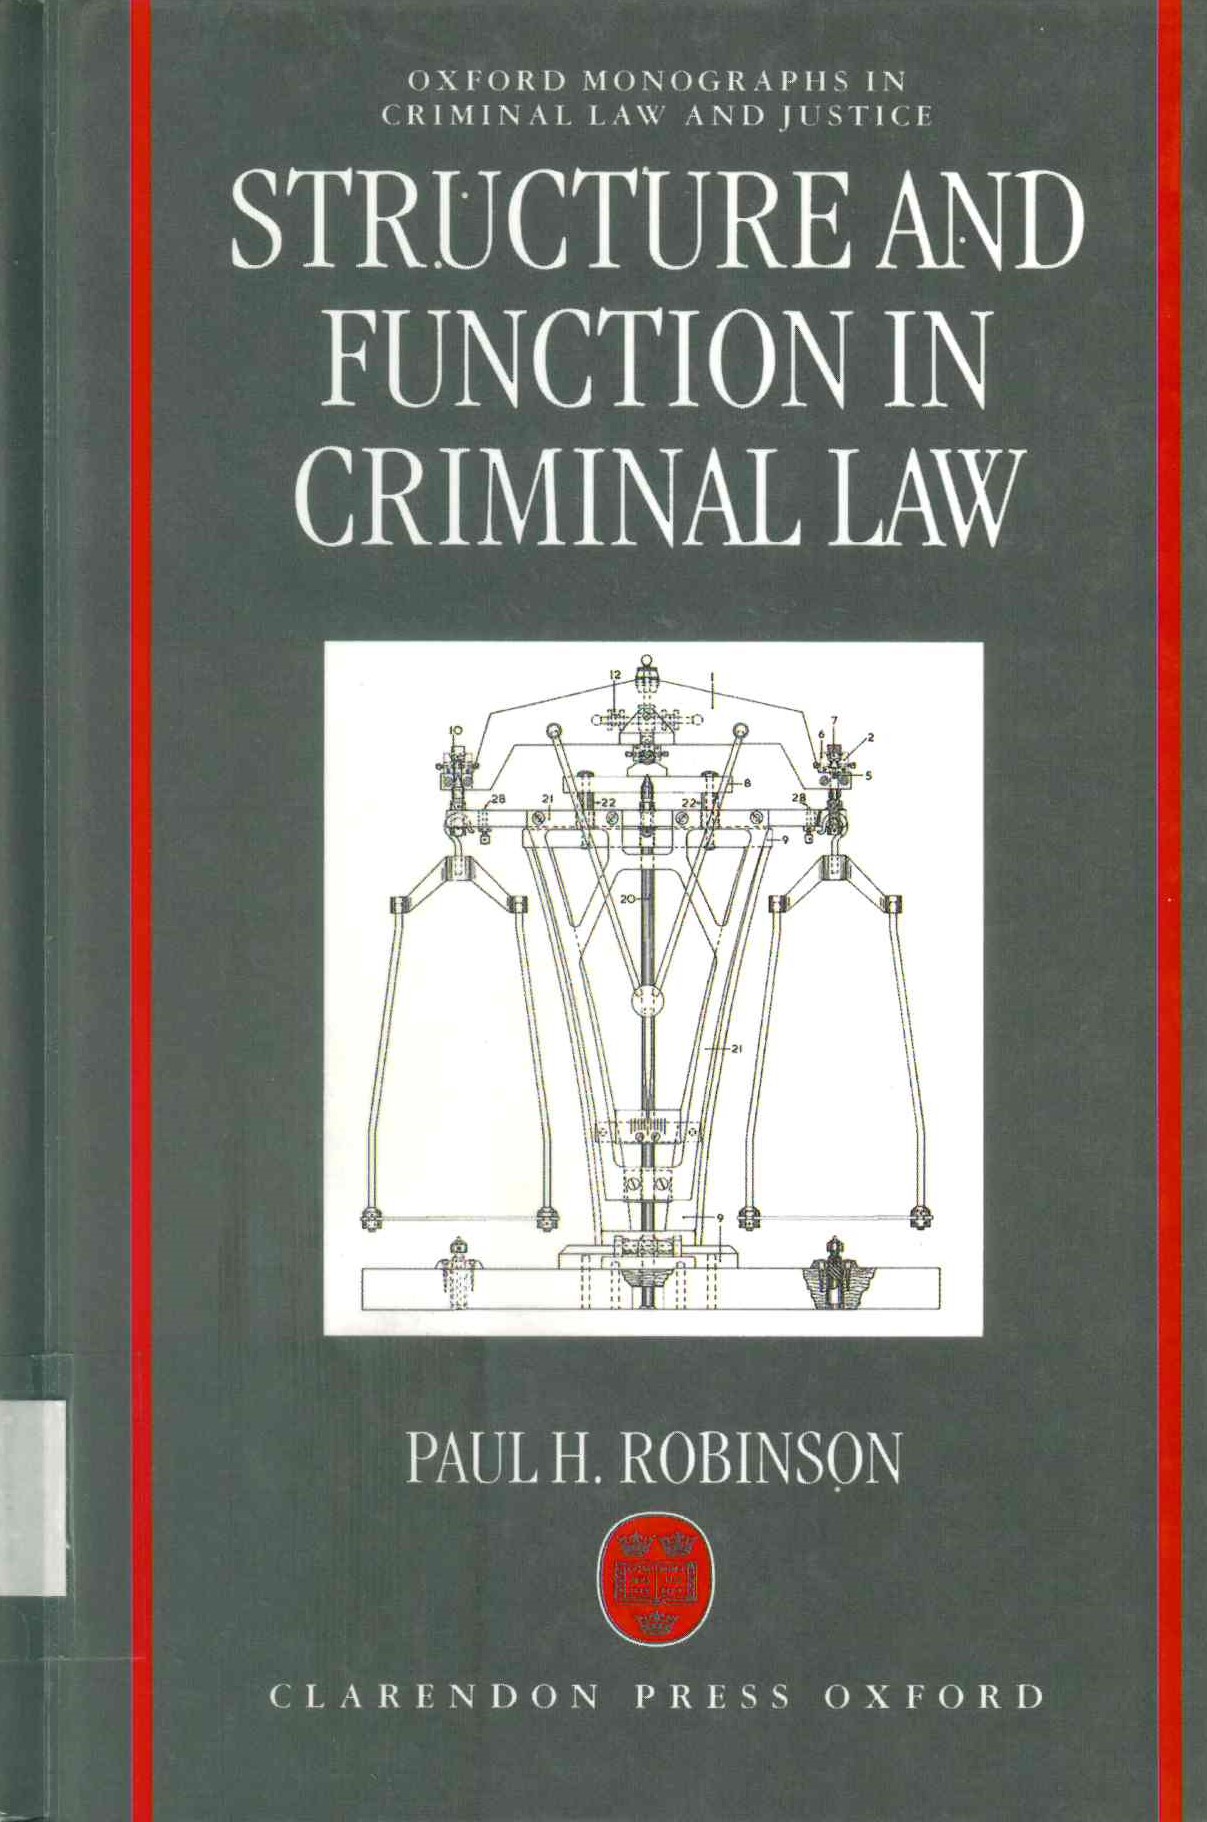 Structure and function in criminal law